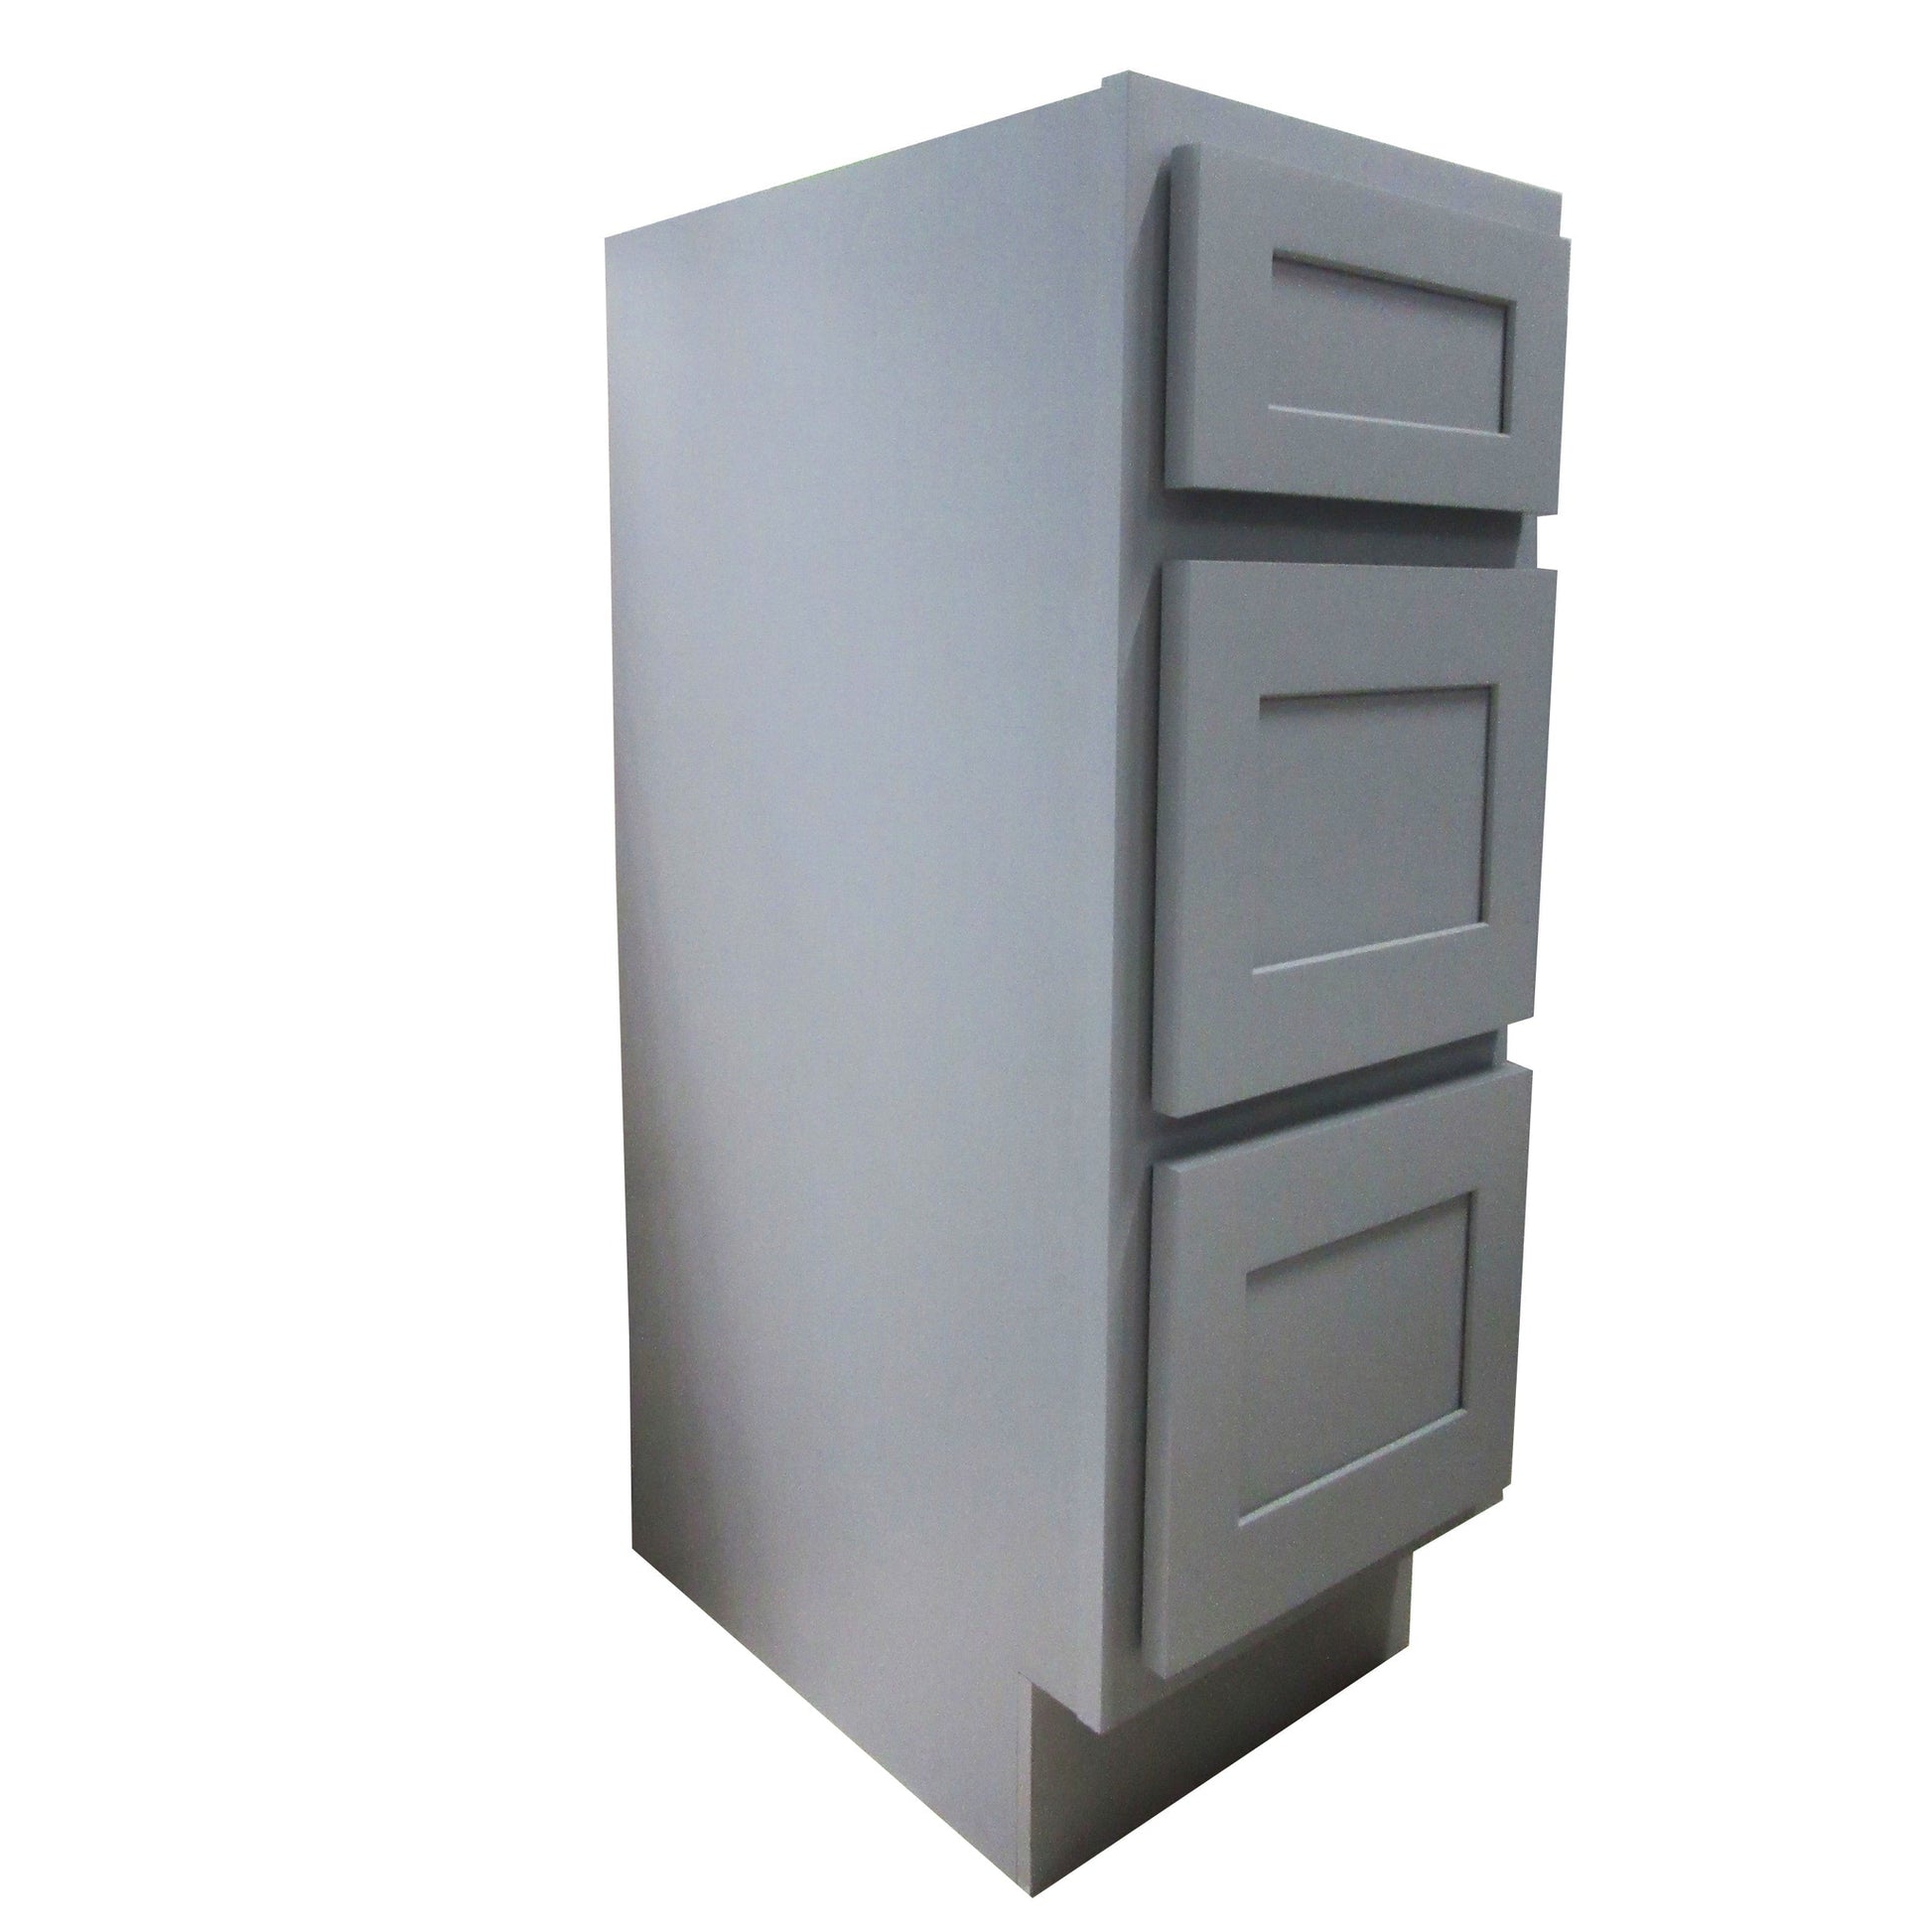 Vanity Art 12" Gray Single Freestanding Solid Wood Vanity Cabinet With 3 Soft Closing Drawers